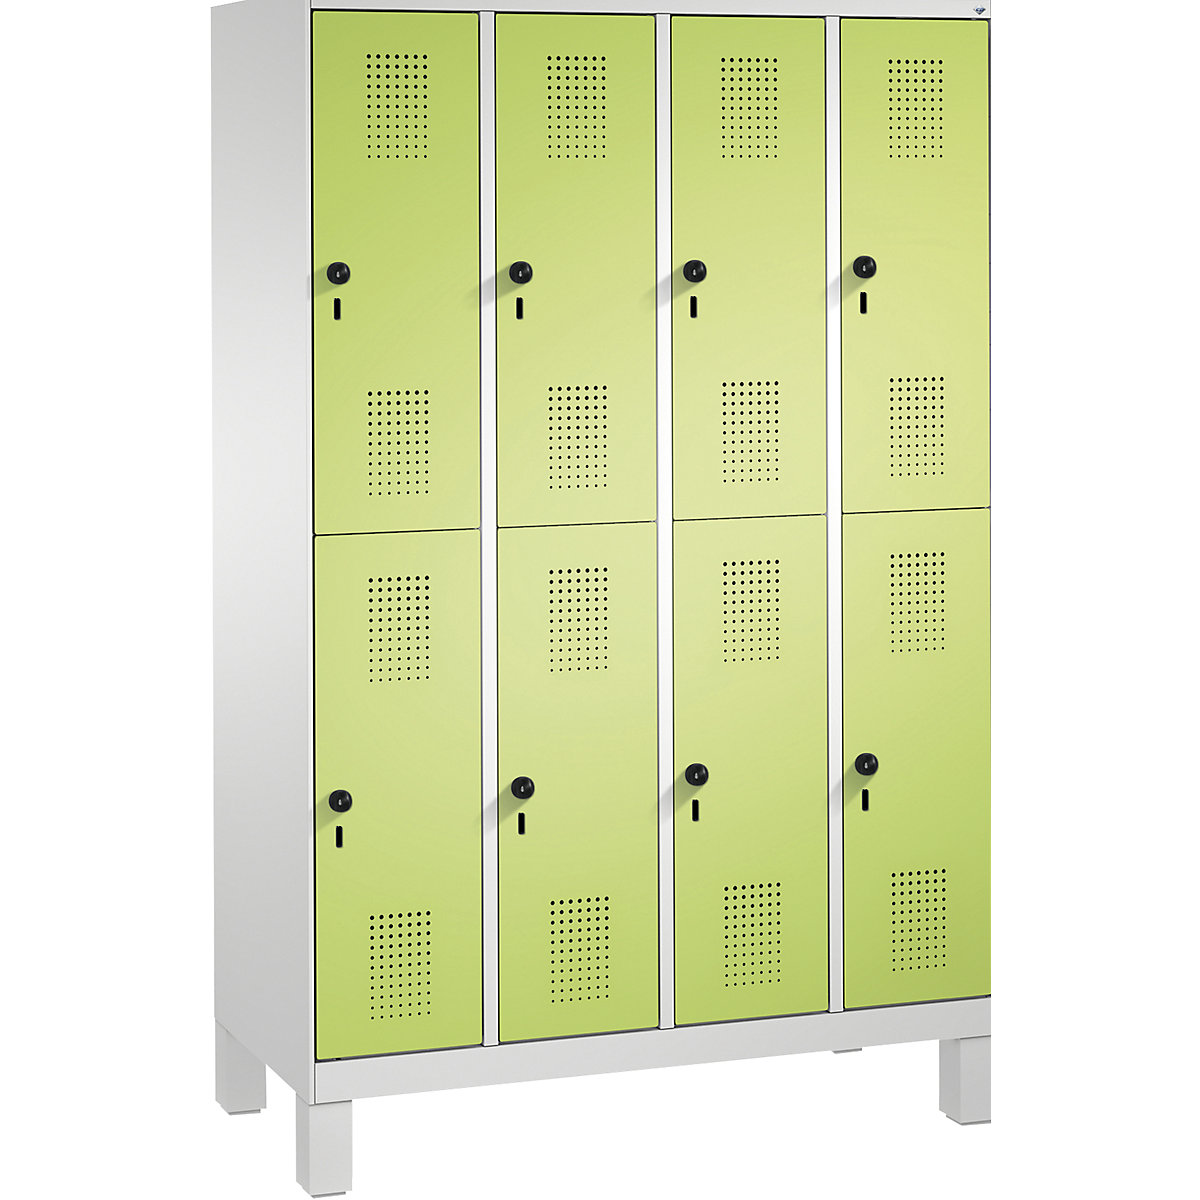 EVOLO cloakroom locker, double tier, with feet – C+P, 4 compartments, 2 shelf compartments each, compartment width 300 mm, light grey / viridian green-5